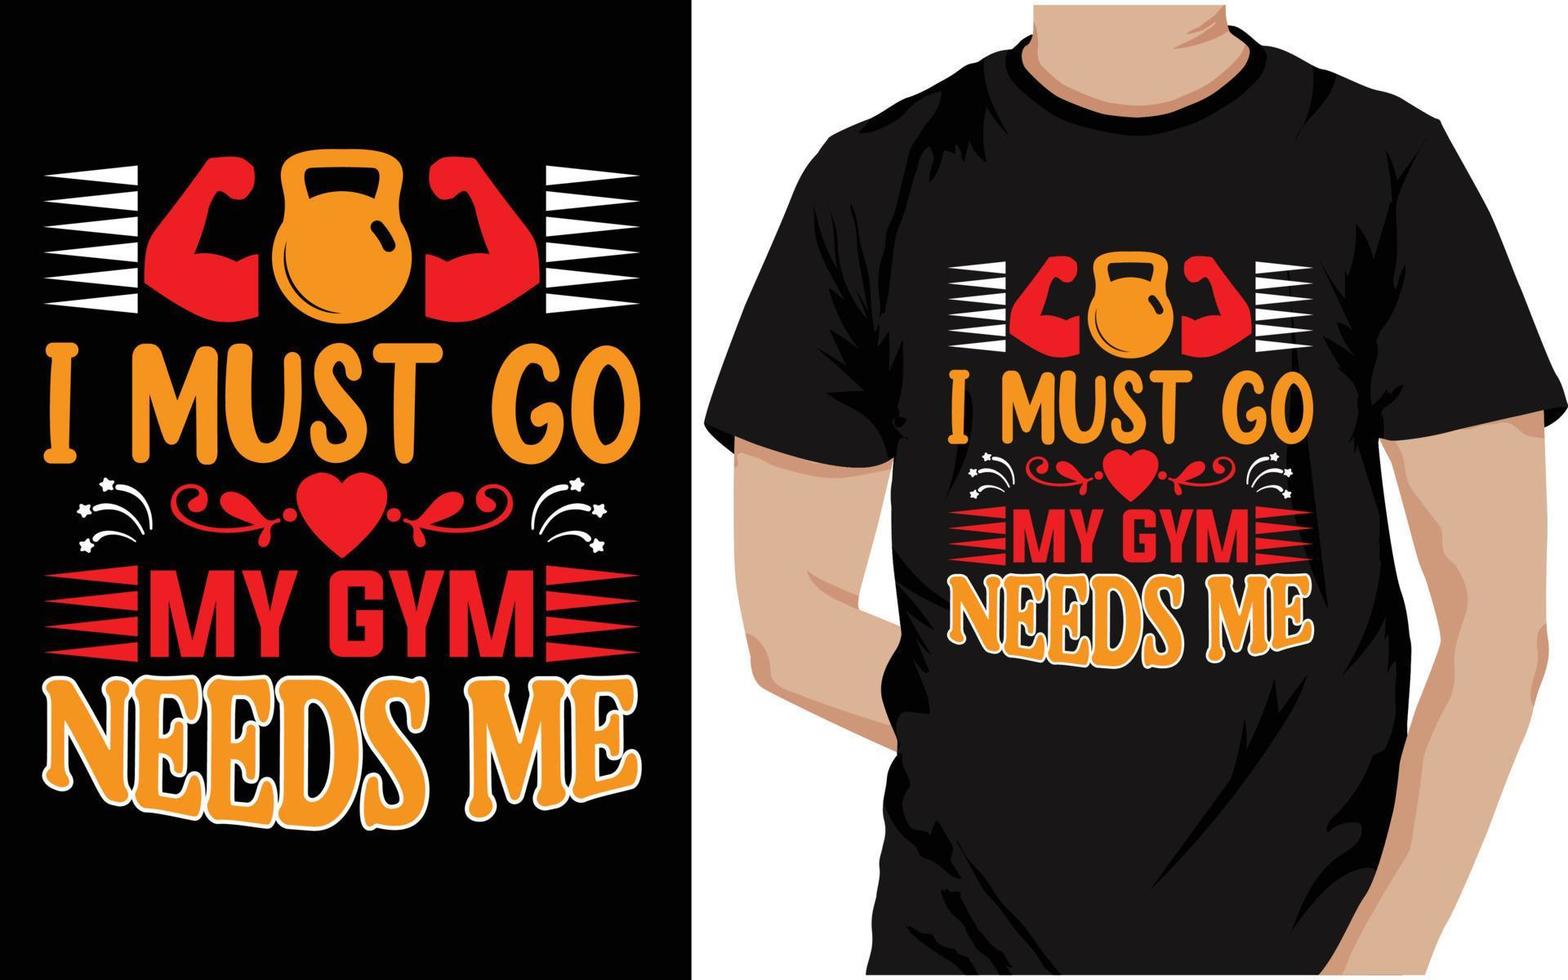 https://static.vecteezy.com/system/resources/previews/022/901/729/non_2x/gym-t-shirt-design-template-gym-workout-t-shirt-gym-t-shirts-for-ladies-gym-logo-t-shirt-vector.jpg